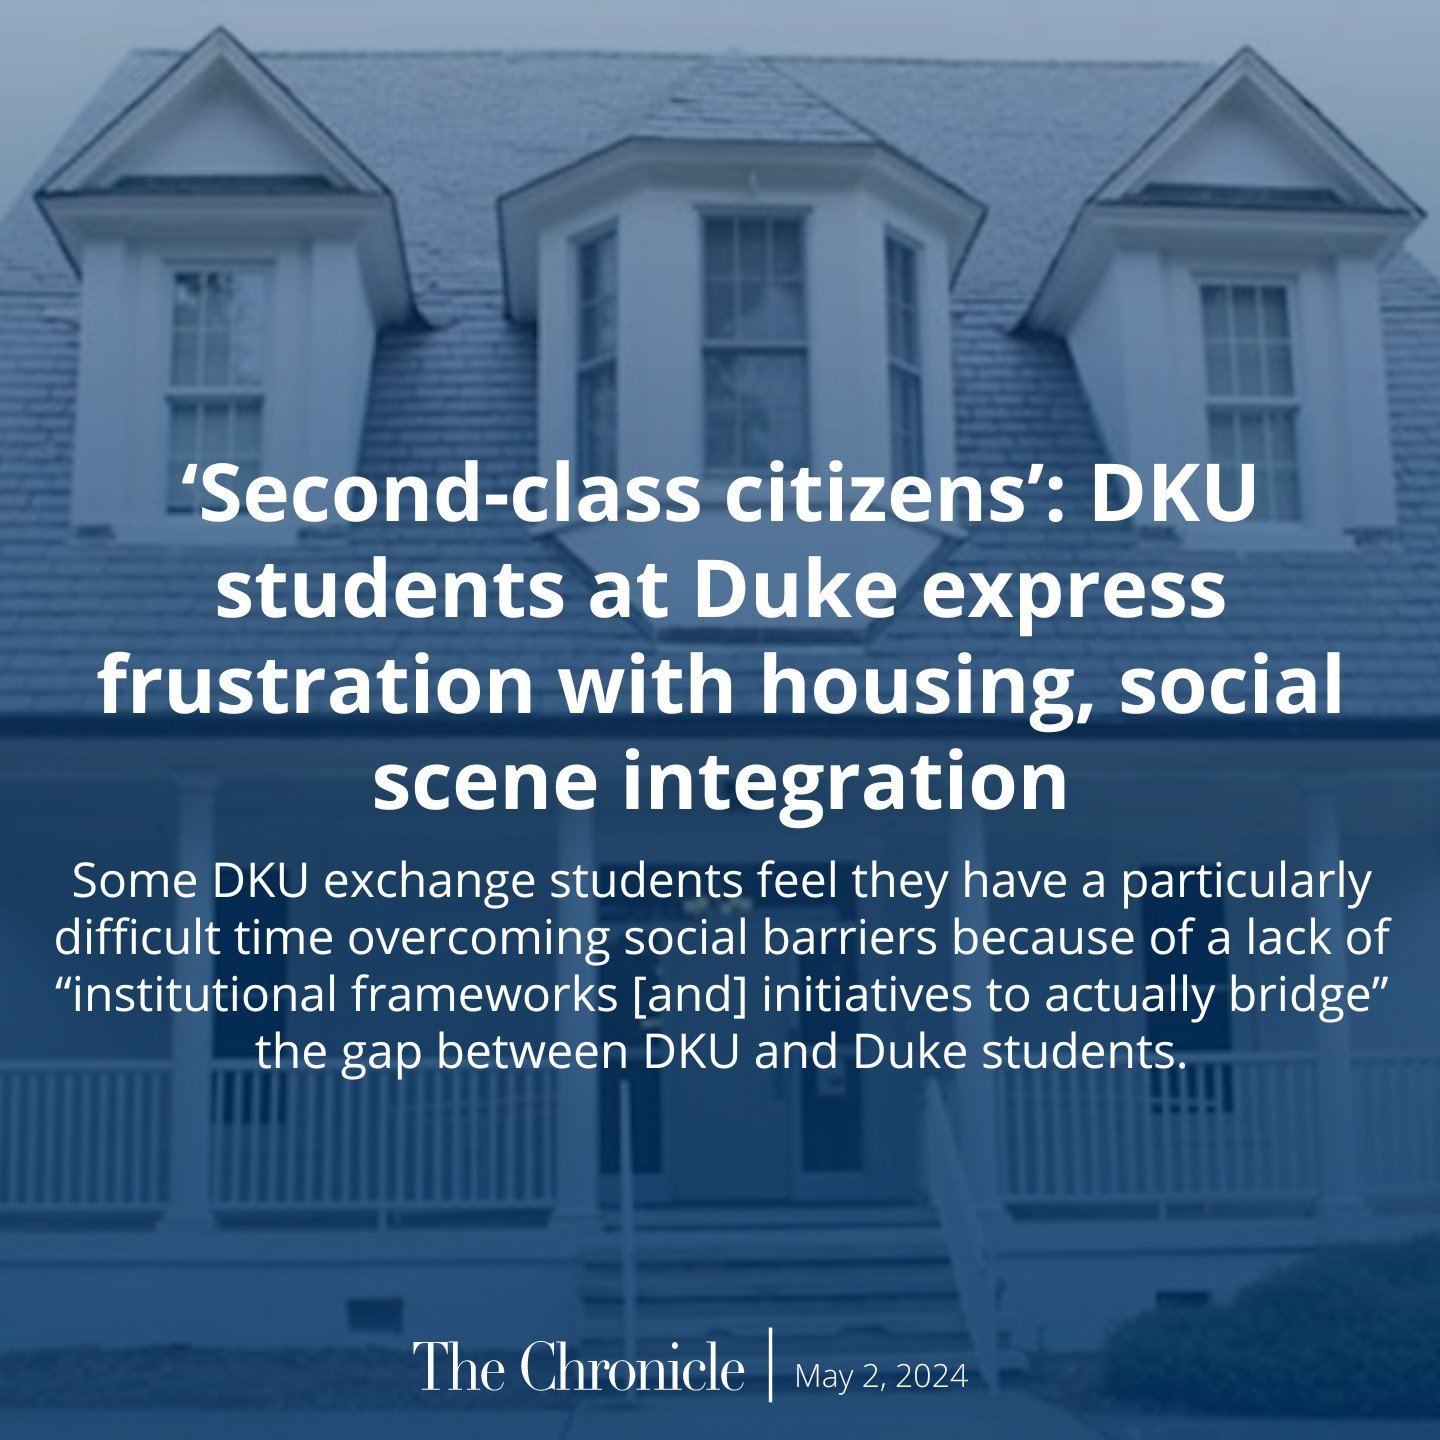 Duke Kunshan University exchange students reported challenges establishing a sense of community at Duke, citing frustration with housing and difficulty integrating into the campus social scene.

The first DKU study abroad cohort spent a semester in D